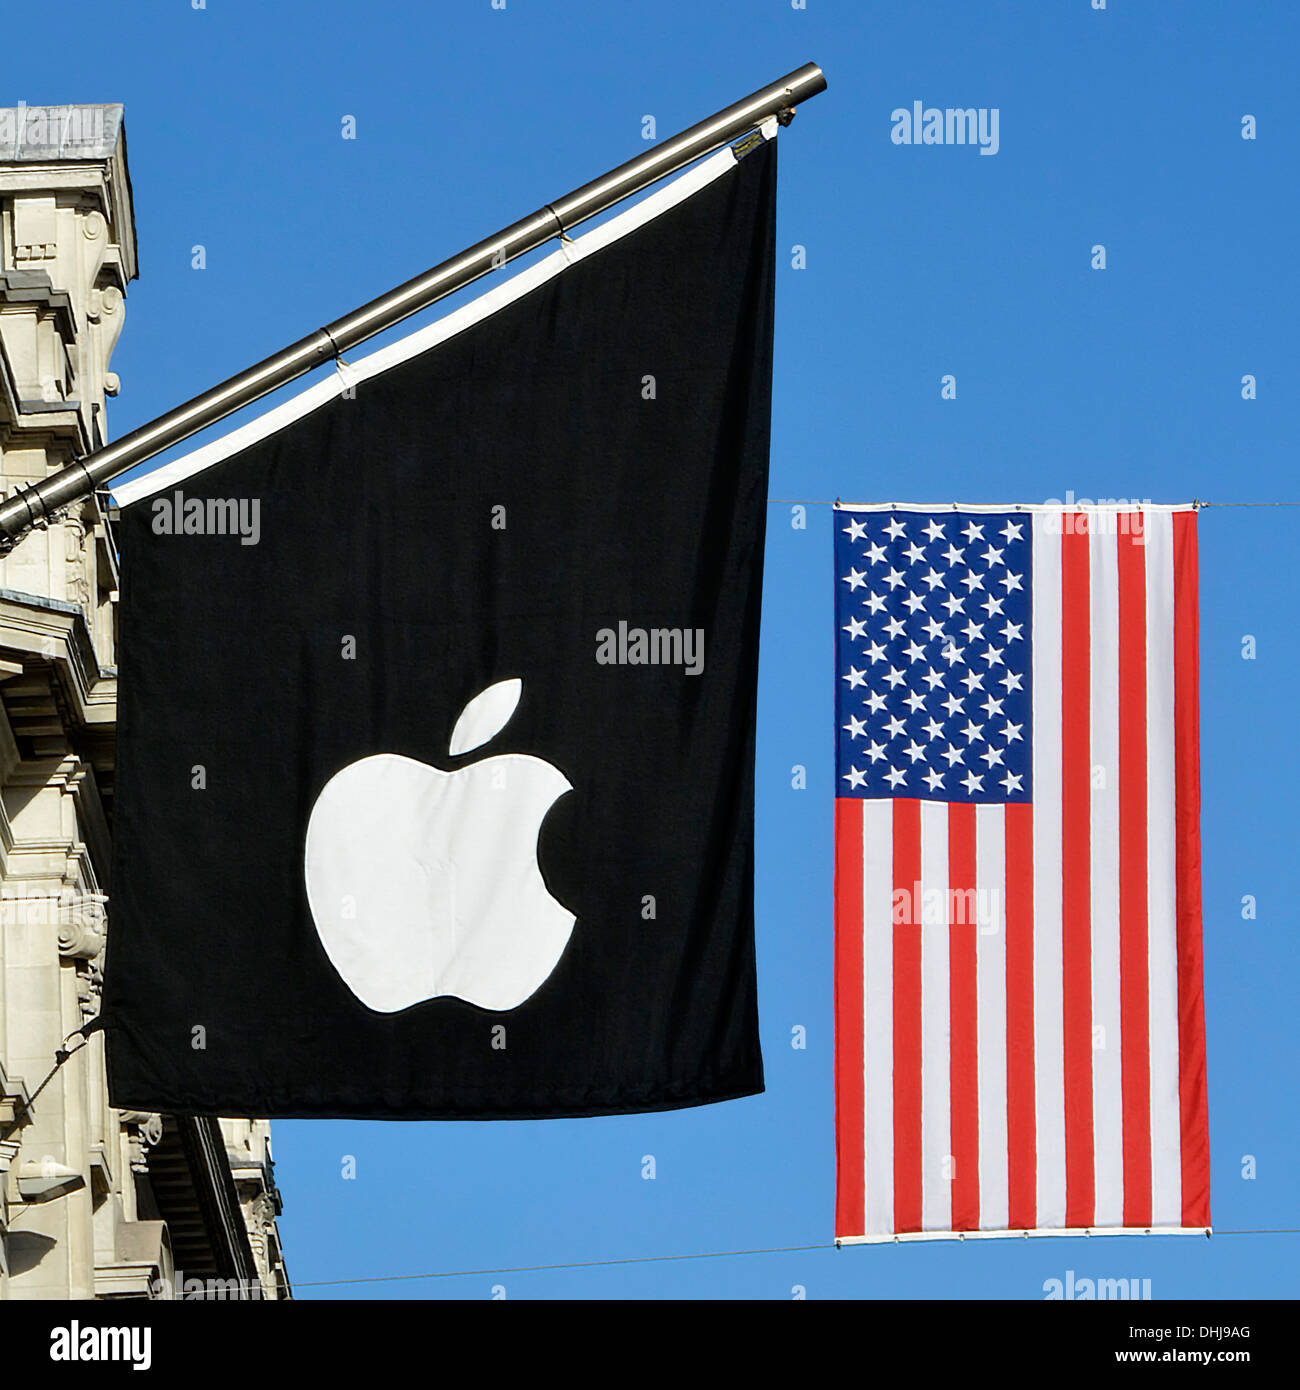 Exterior of Apple store logo on flagpole & American flag suspended beyond on cables across Regents Street decorations for a London event England UK Stock Photo